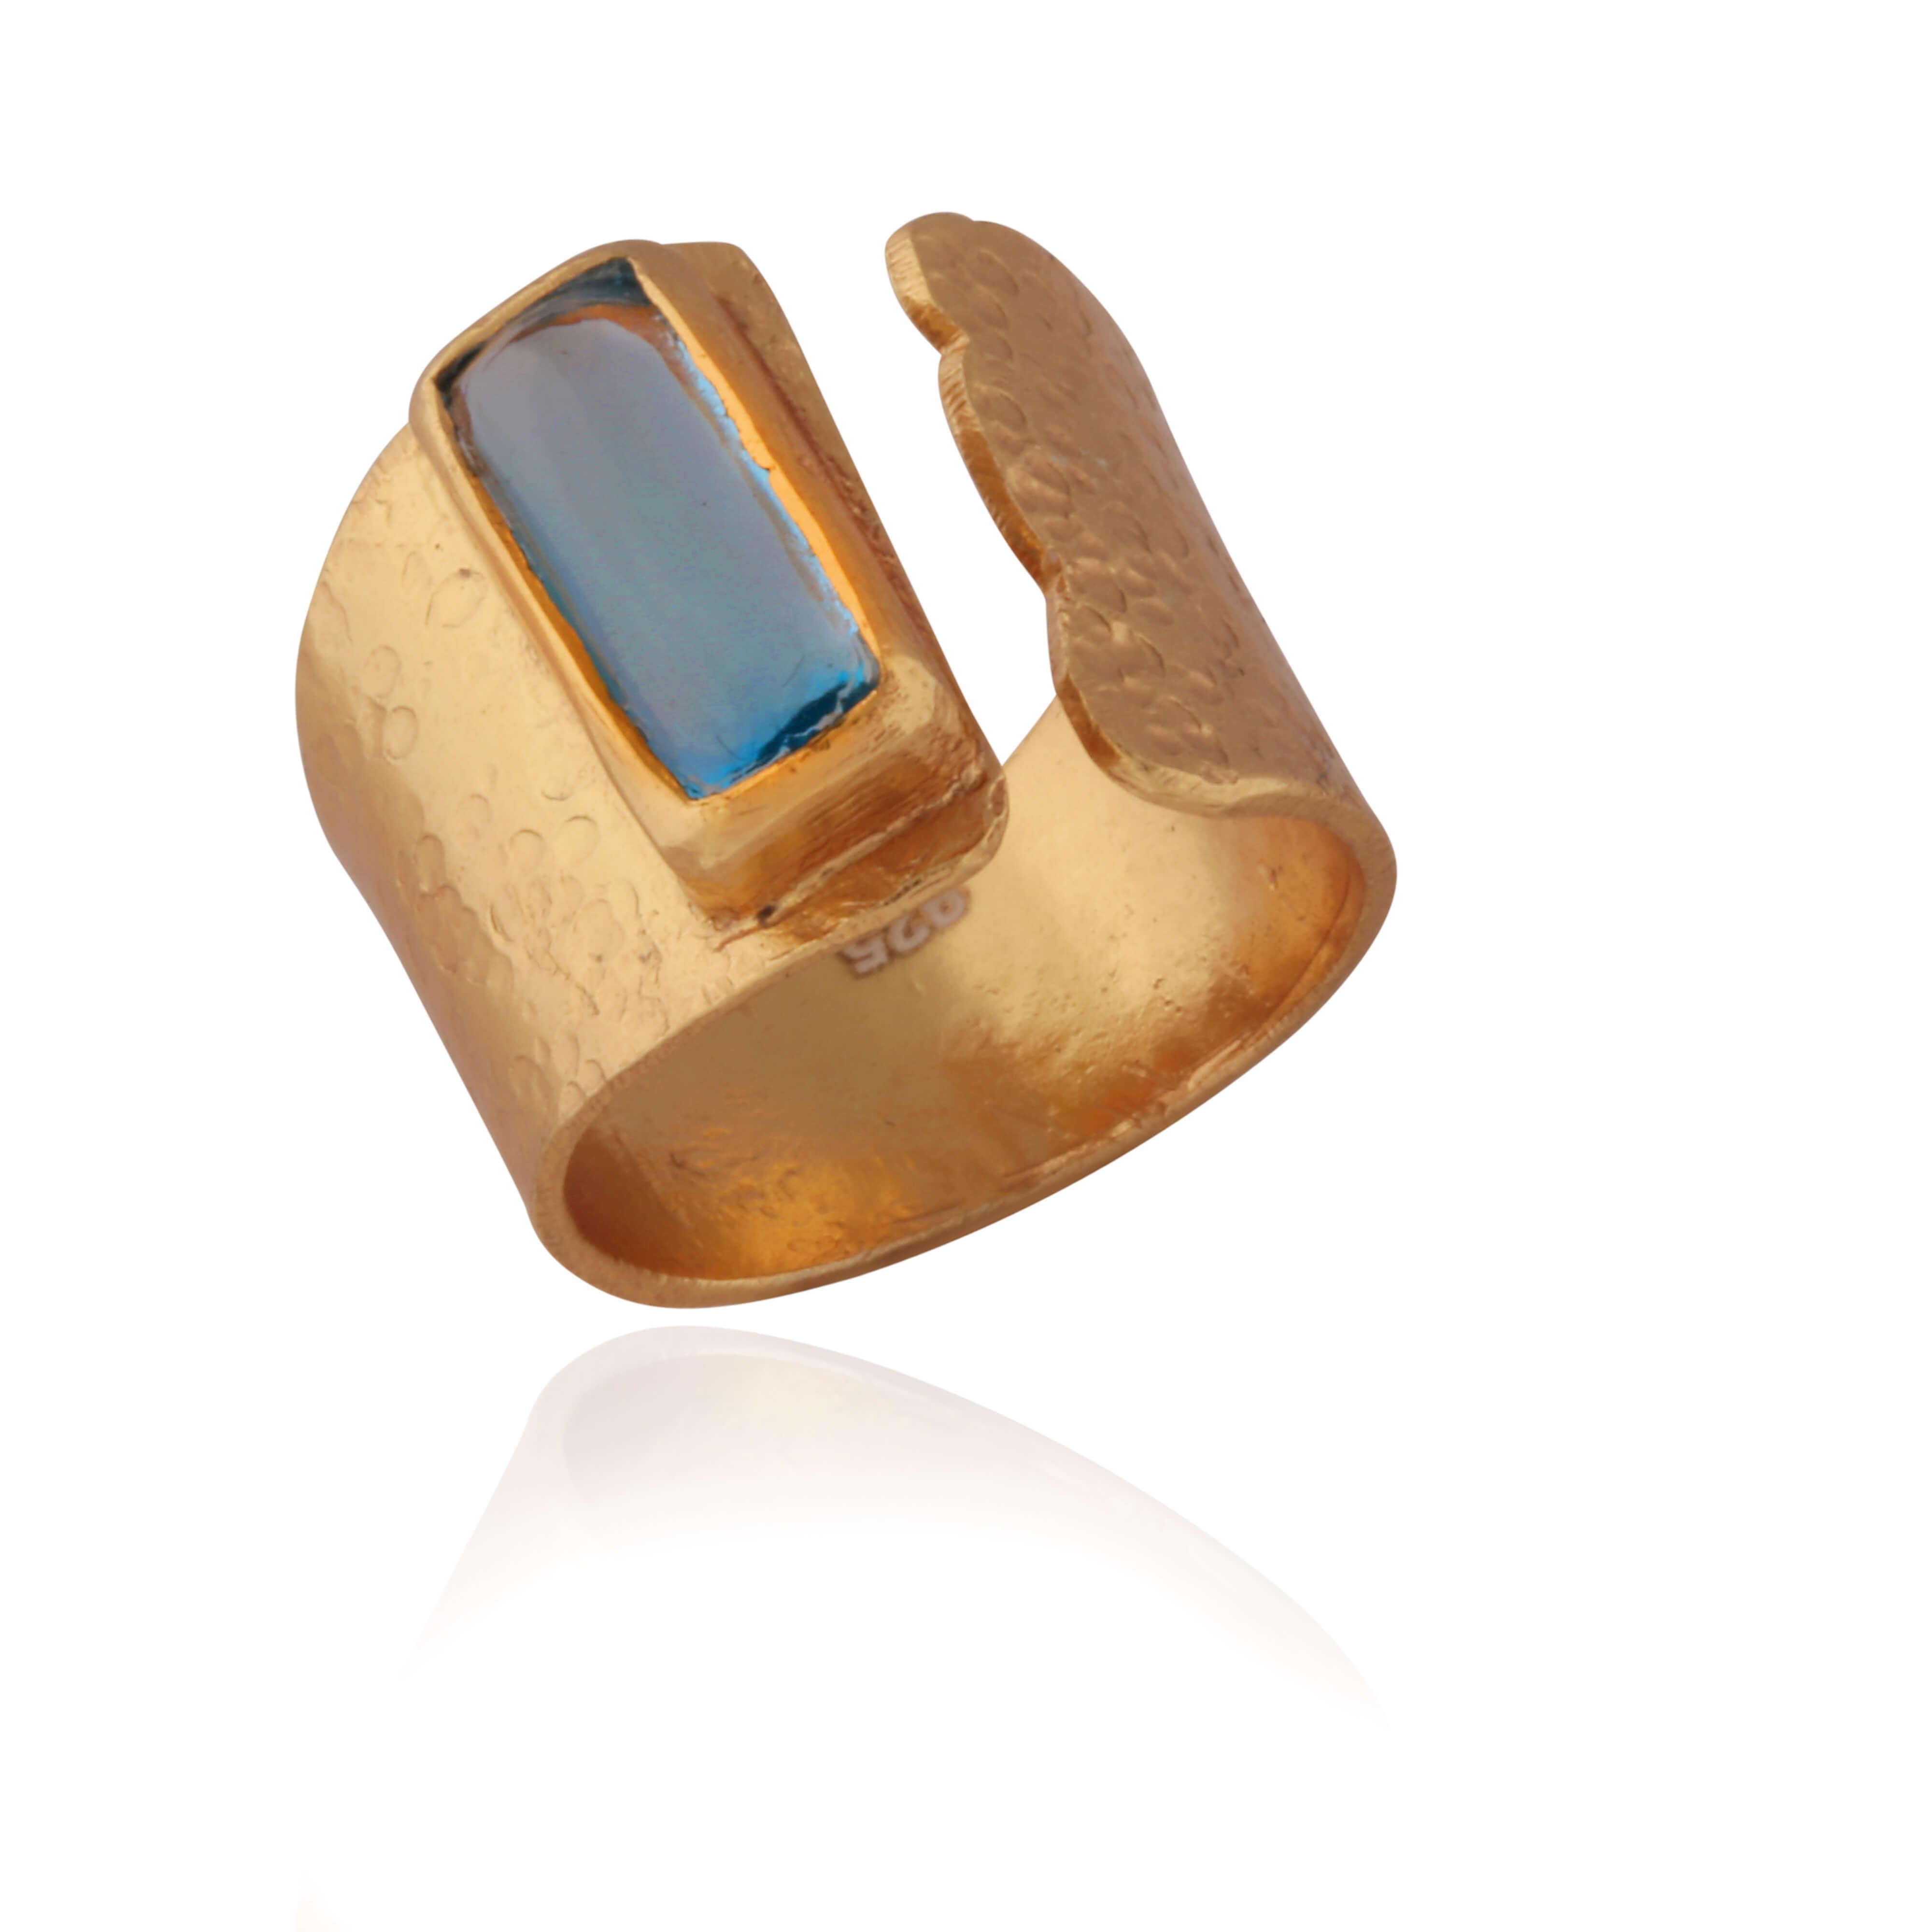 A beautiful art deco, on trend ring set with a striking blue topaz stone.

Has room for adjustment so the ring can fit various fingers.

Gold plated on silver.

UK Size: N, 17mm.